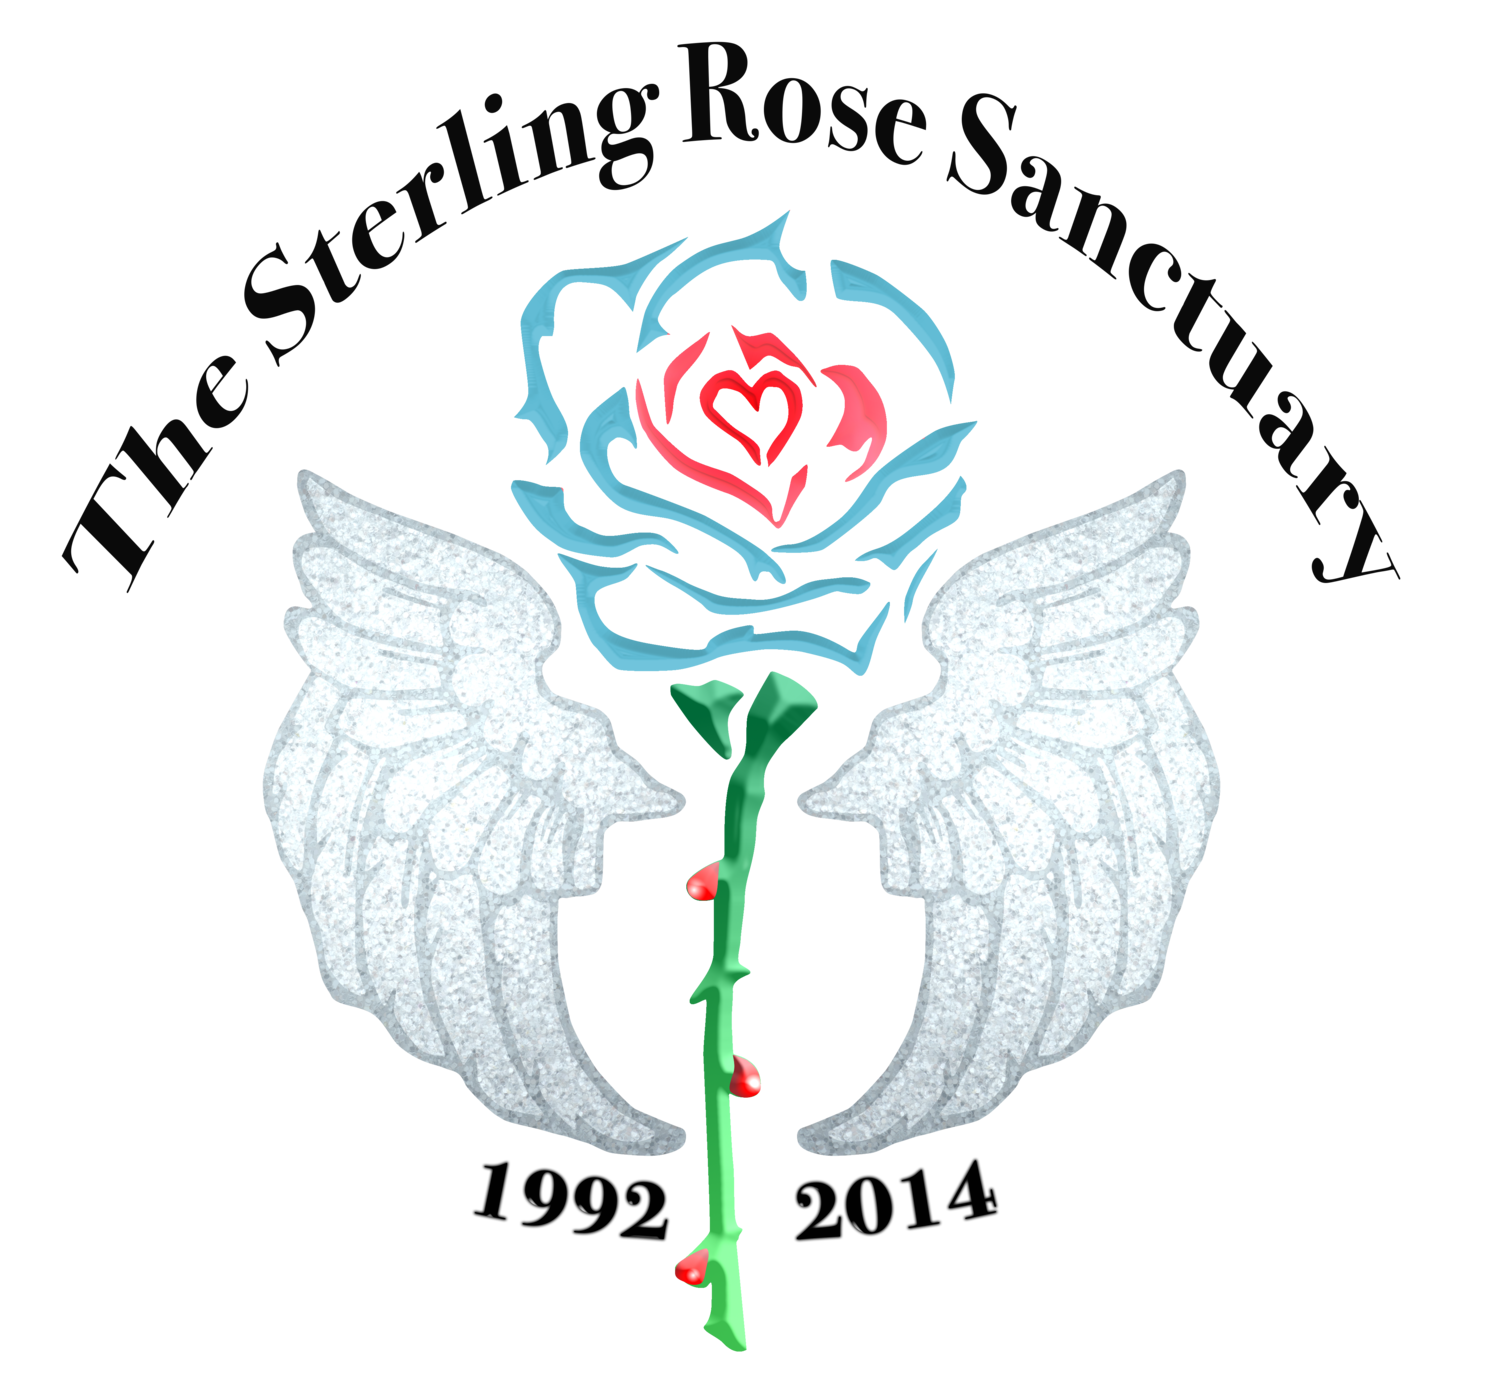 The Sterling Rose Sanctuary